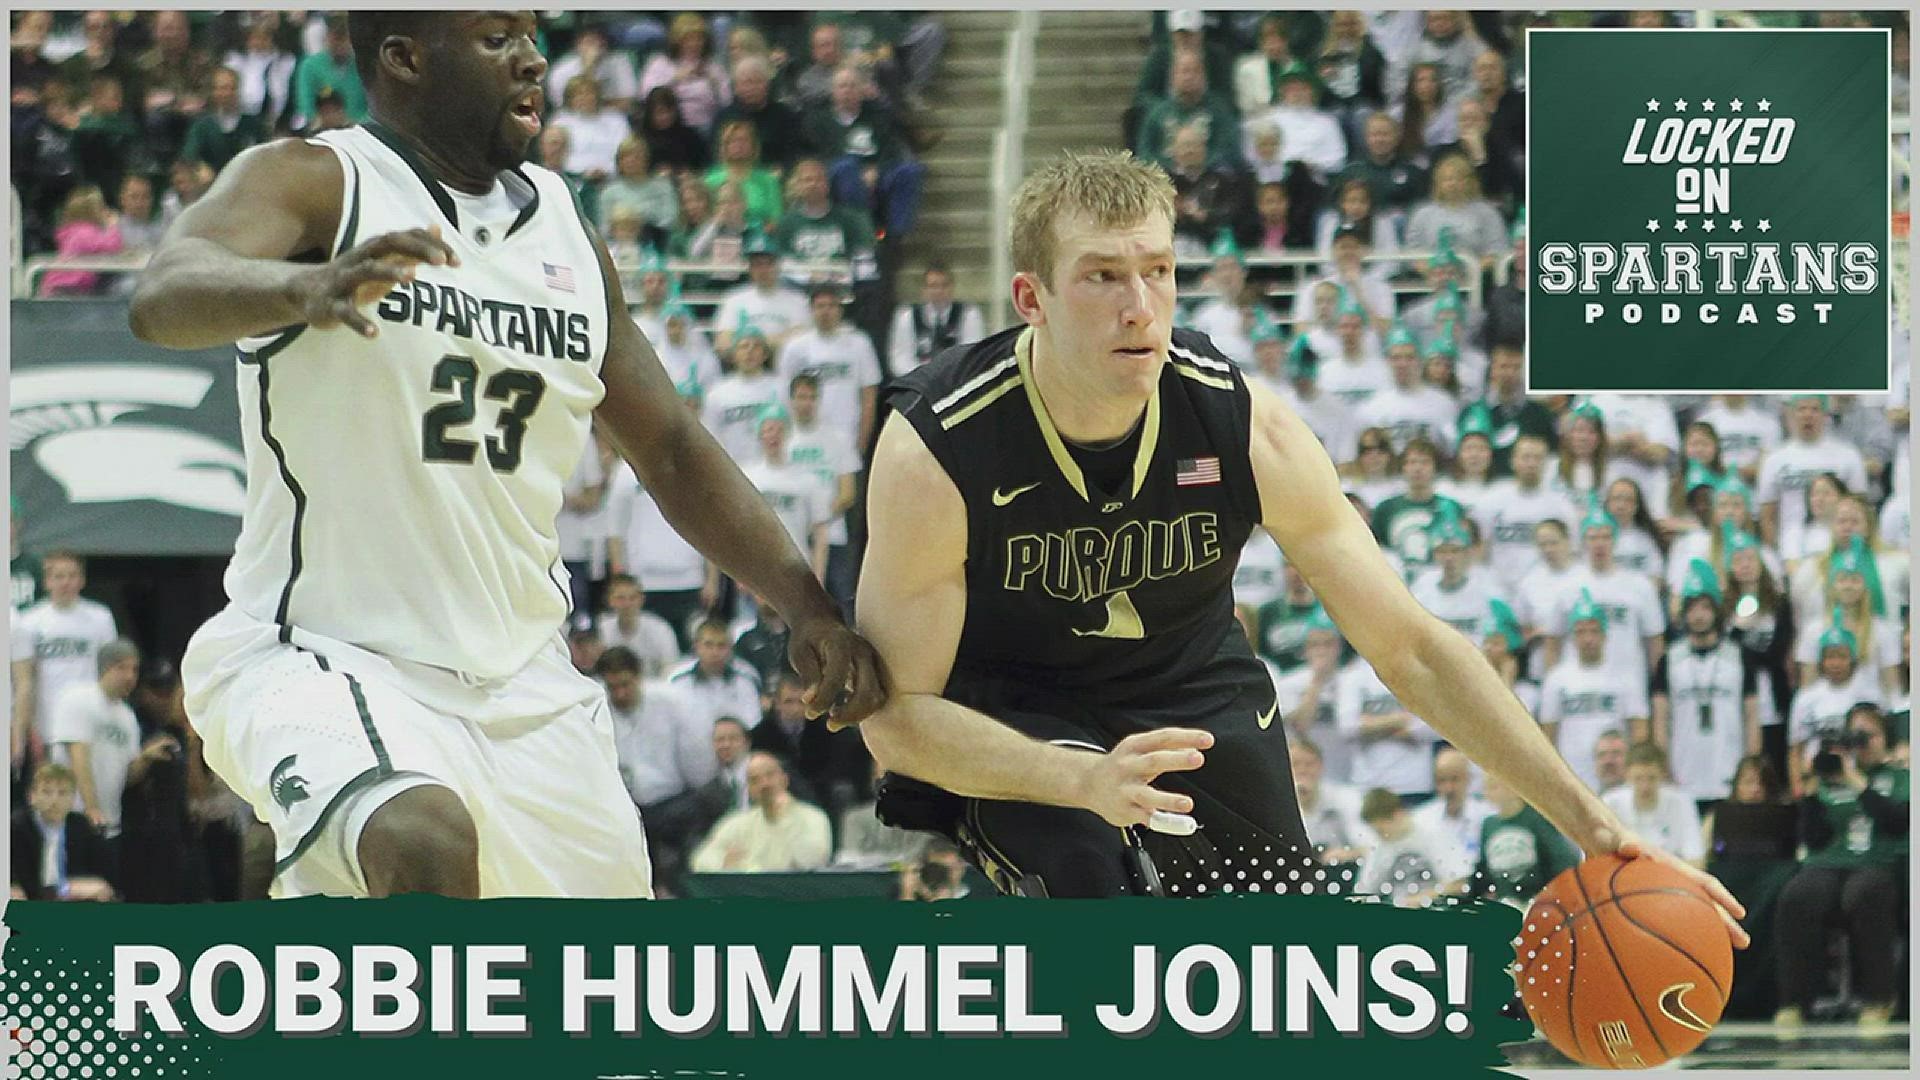 Former Purdue star and current ESPN analyst Robbie Hummel joins the show to talk about all things college basketball inside and outside of East Lansing.